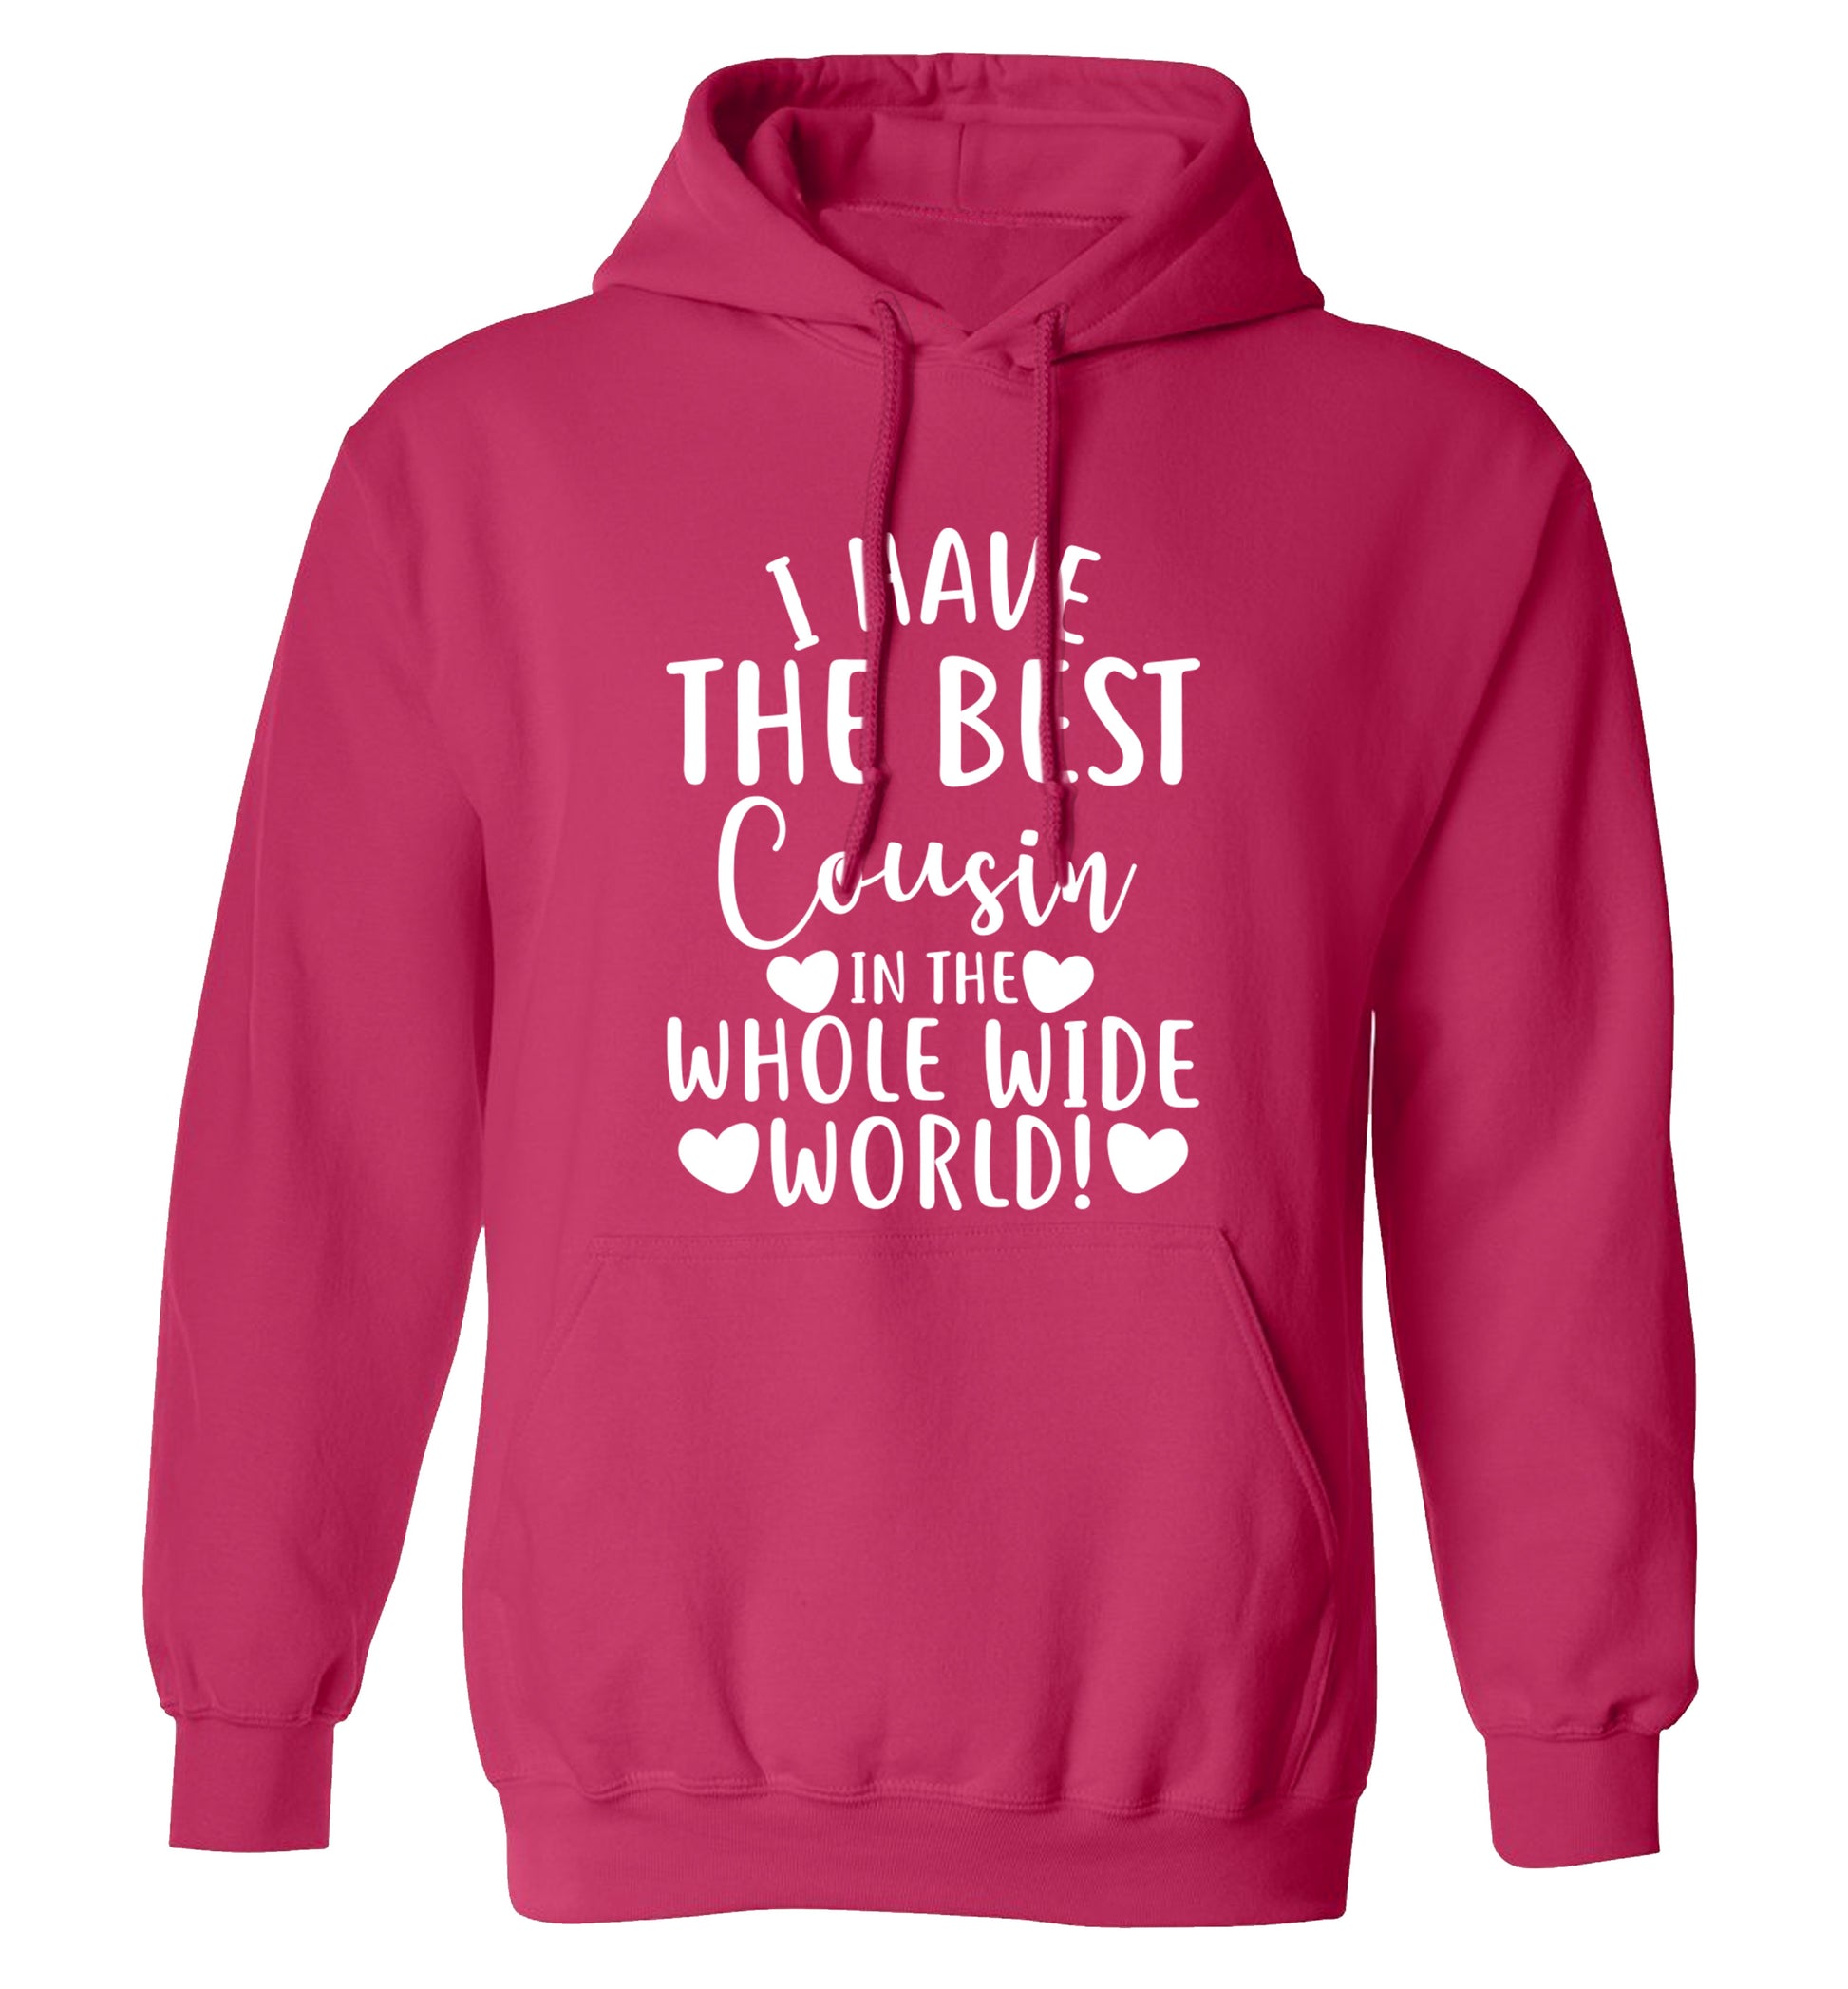 I have the best cousin in the whole wide world! adults unisex pink hoodie 2XL